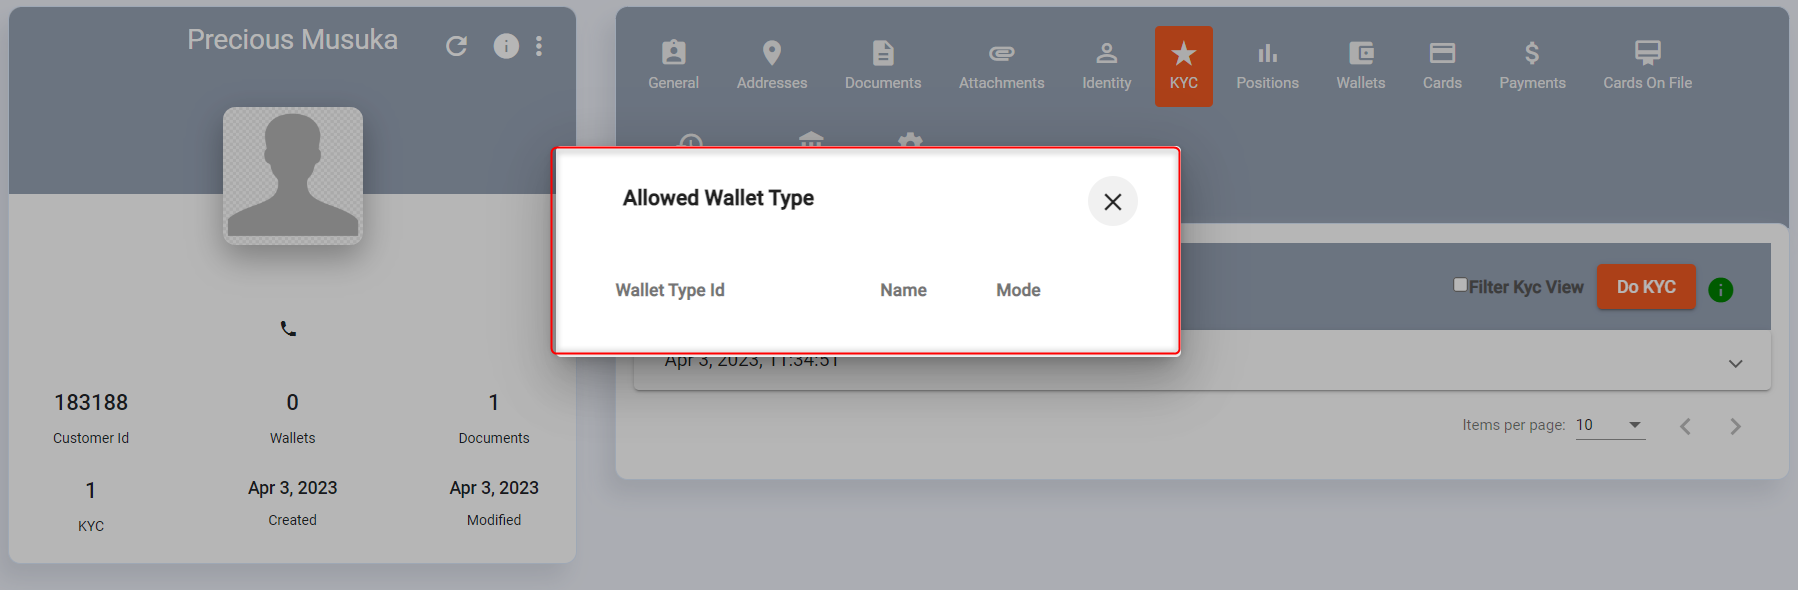 Allowed wallet types: Non-KYCed customer profile